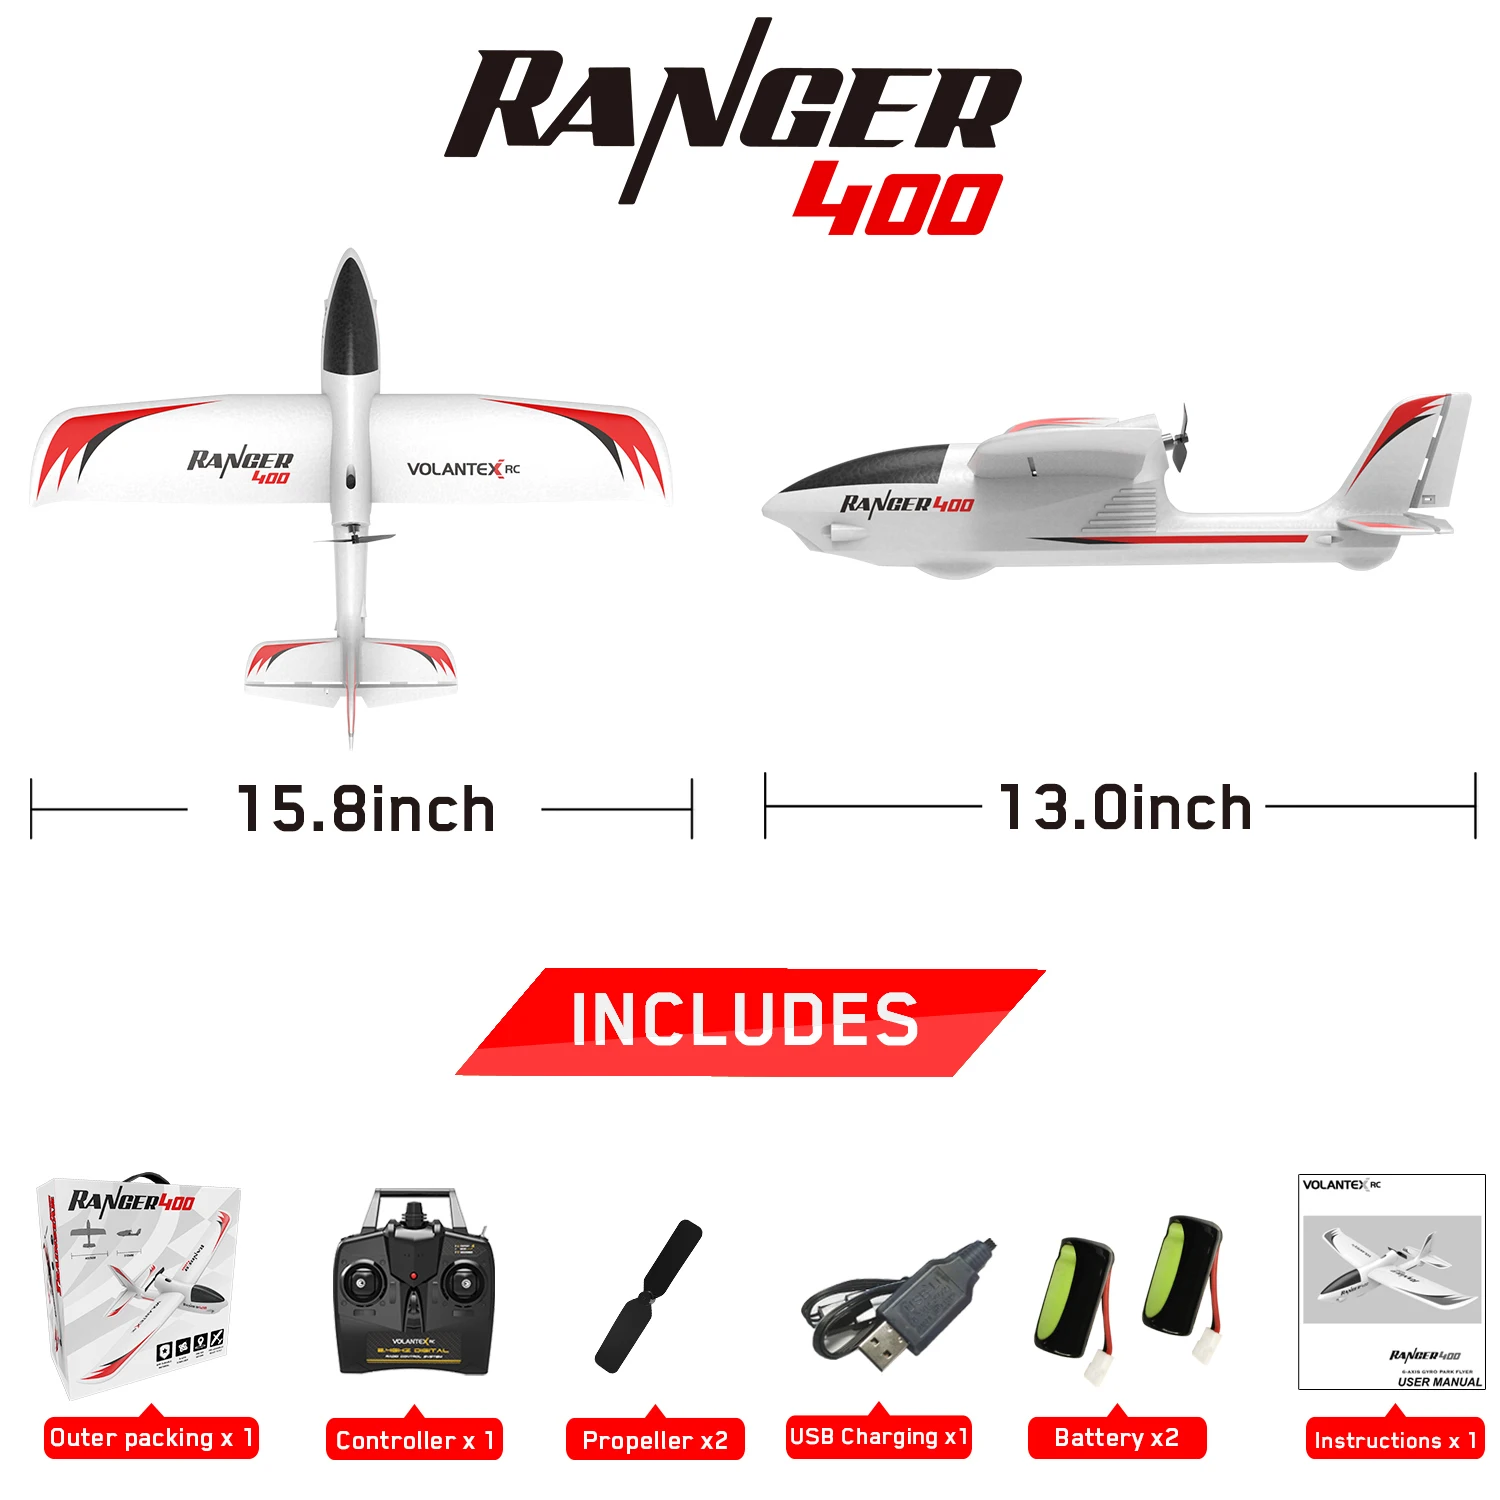 Ranger400 RC Plane 2.4GHz 3CH Glider Remote Control Airplane with Xpilot Stabilization System RTF RC Aircraft Toys Gifts 761-6 images - 6